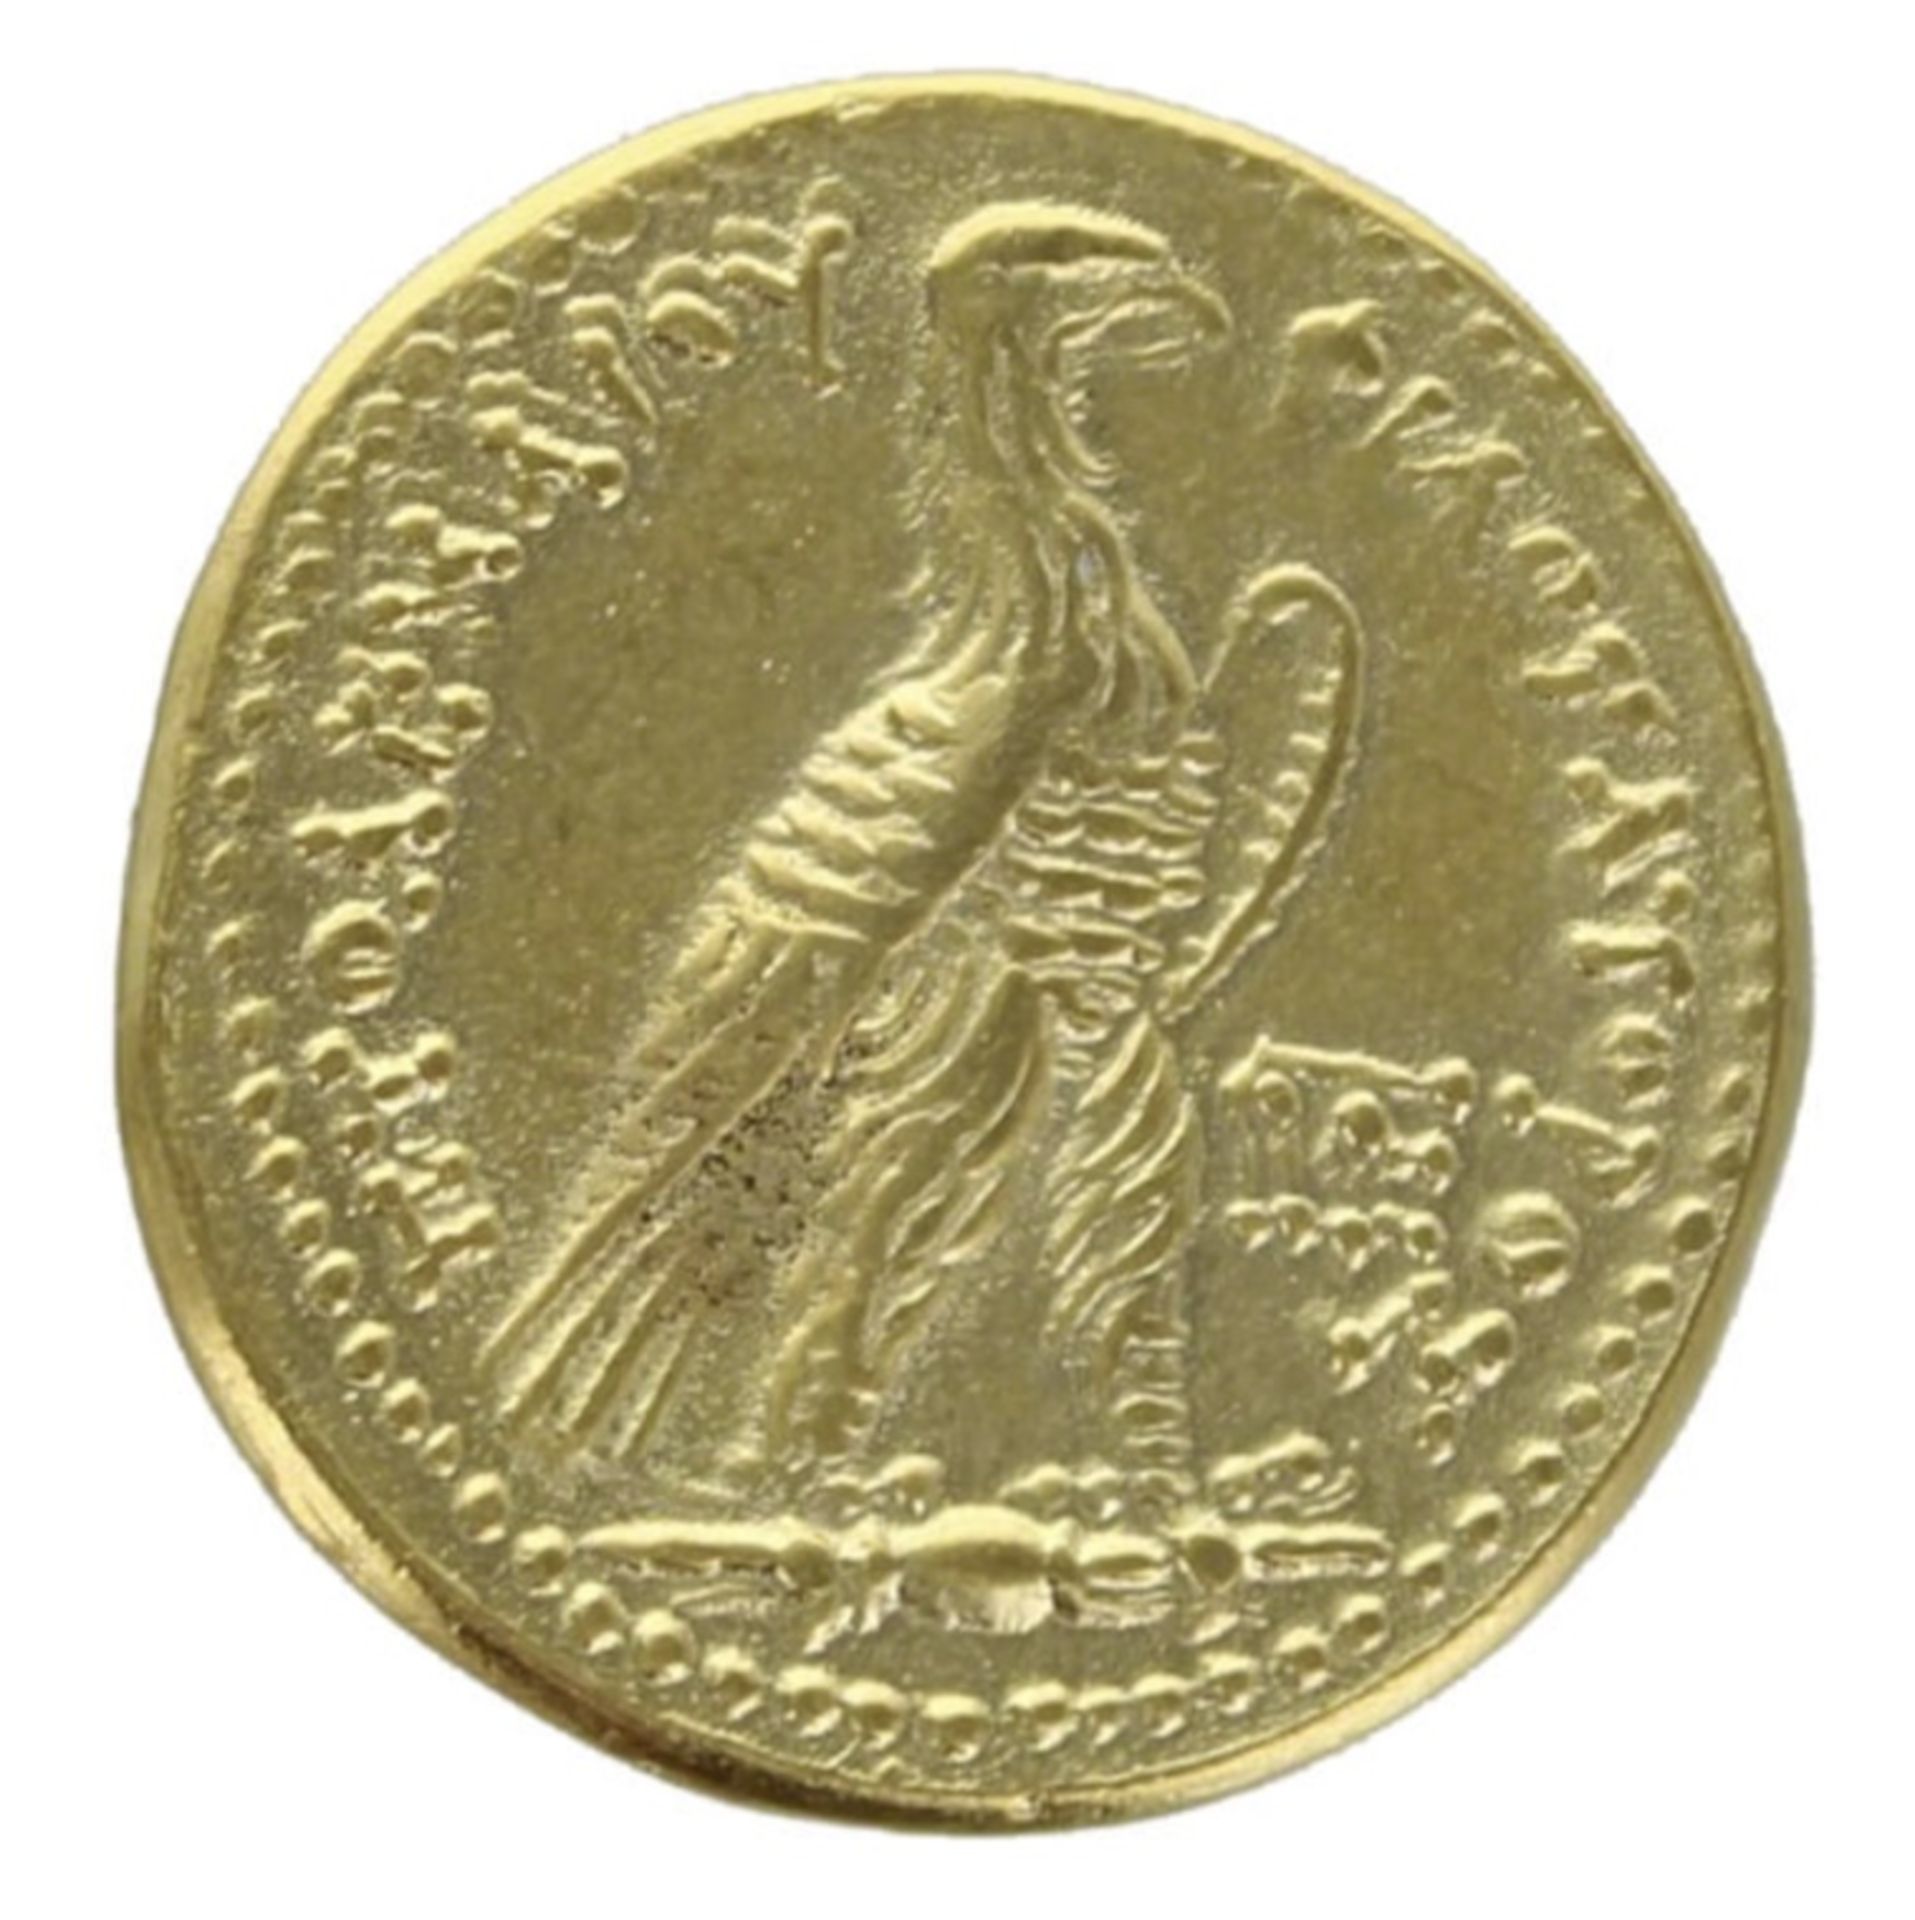 Ptolemy IV Philopator Octadrachm Coin - Image 2 of 2